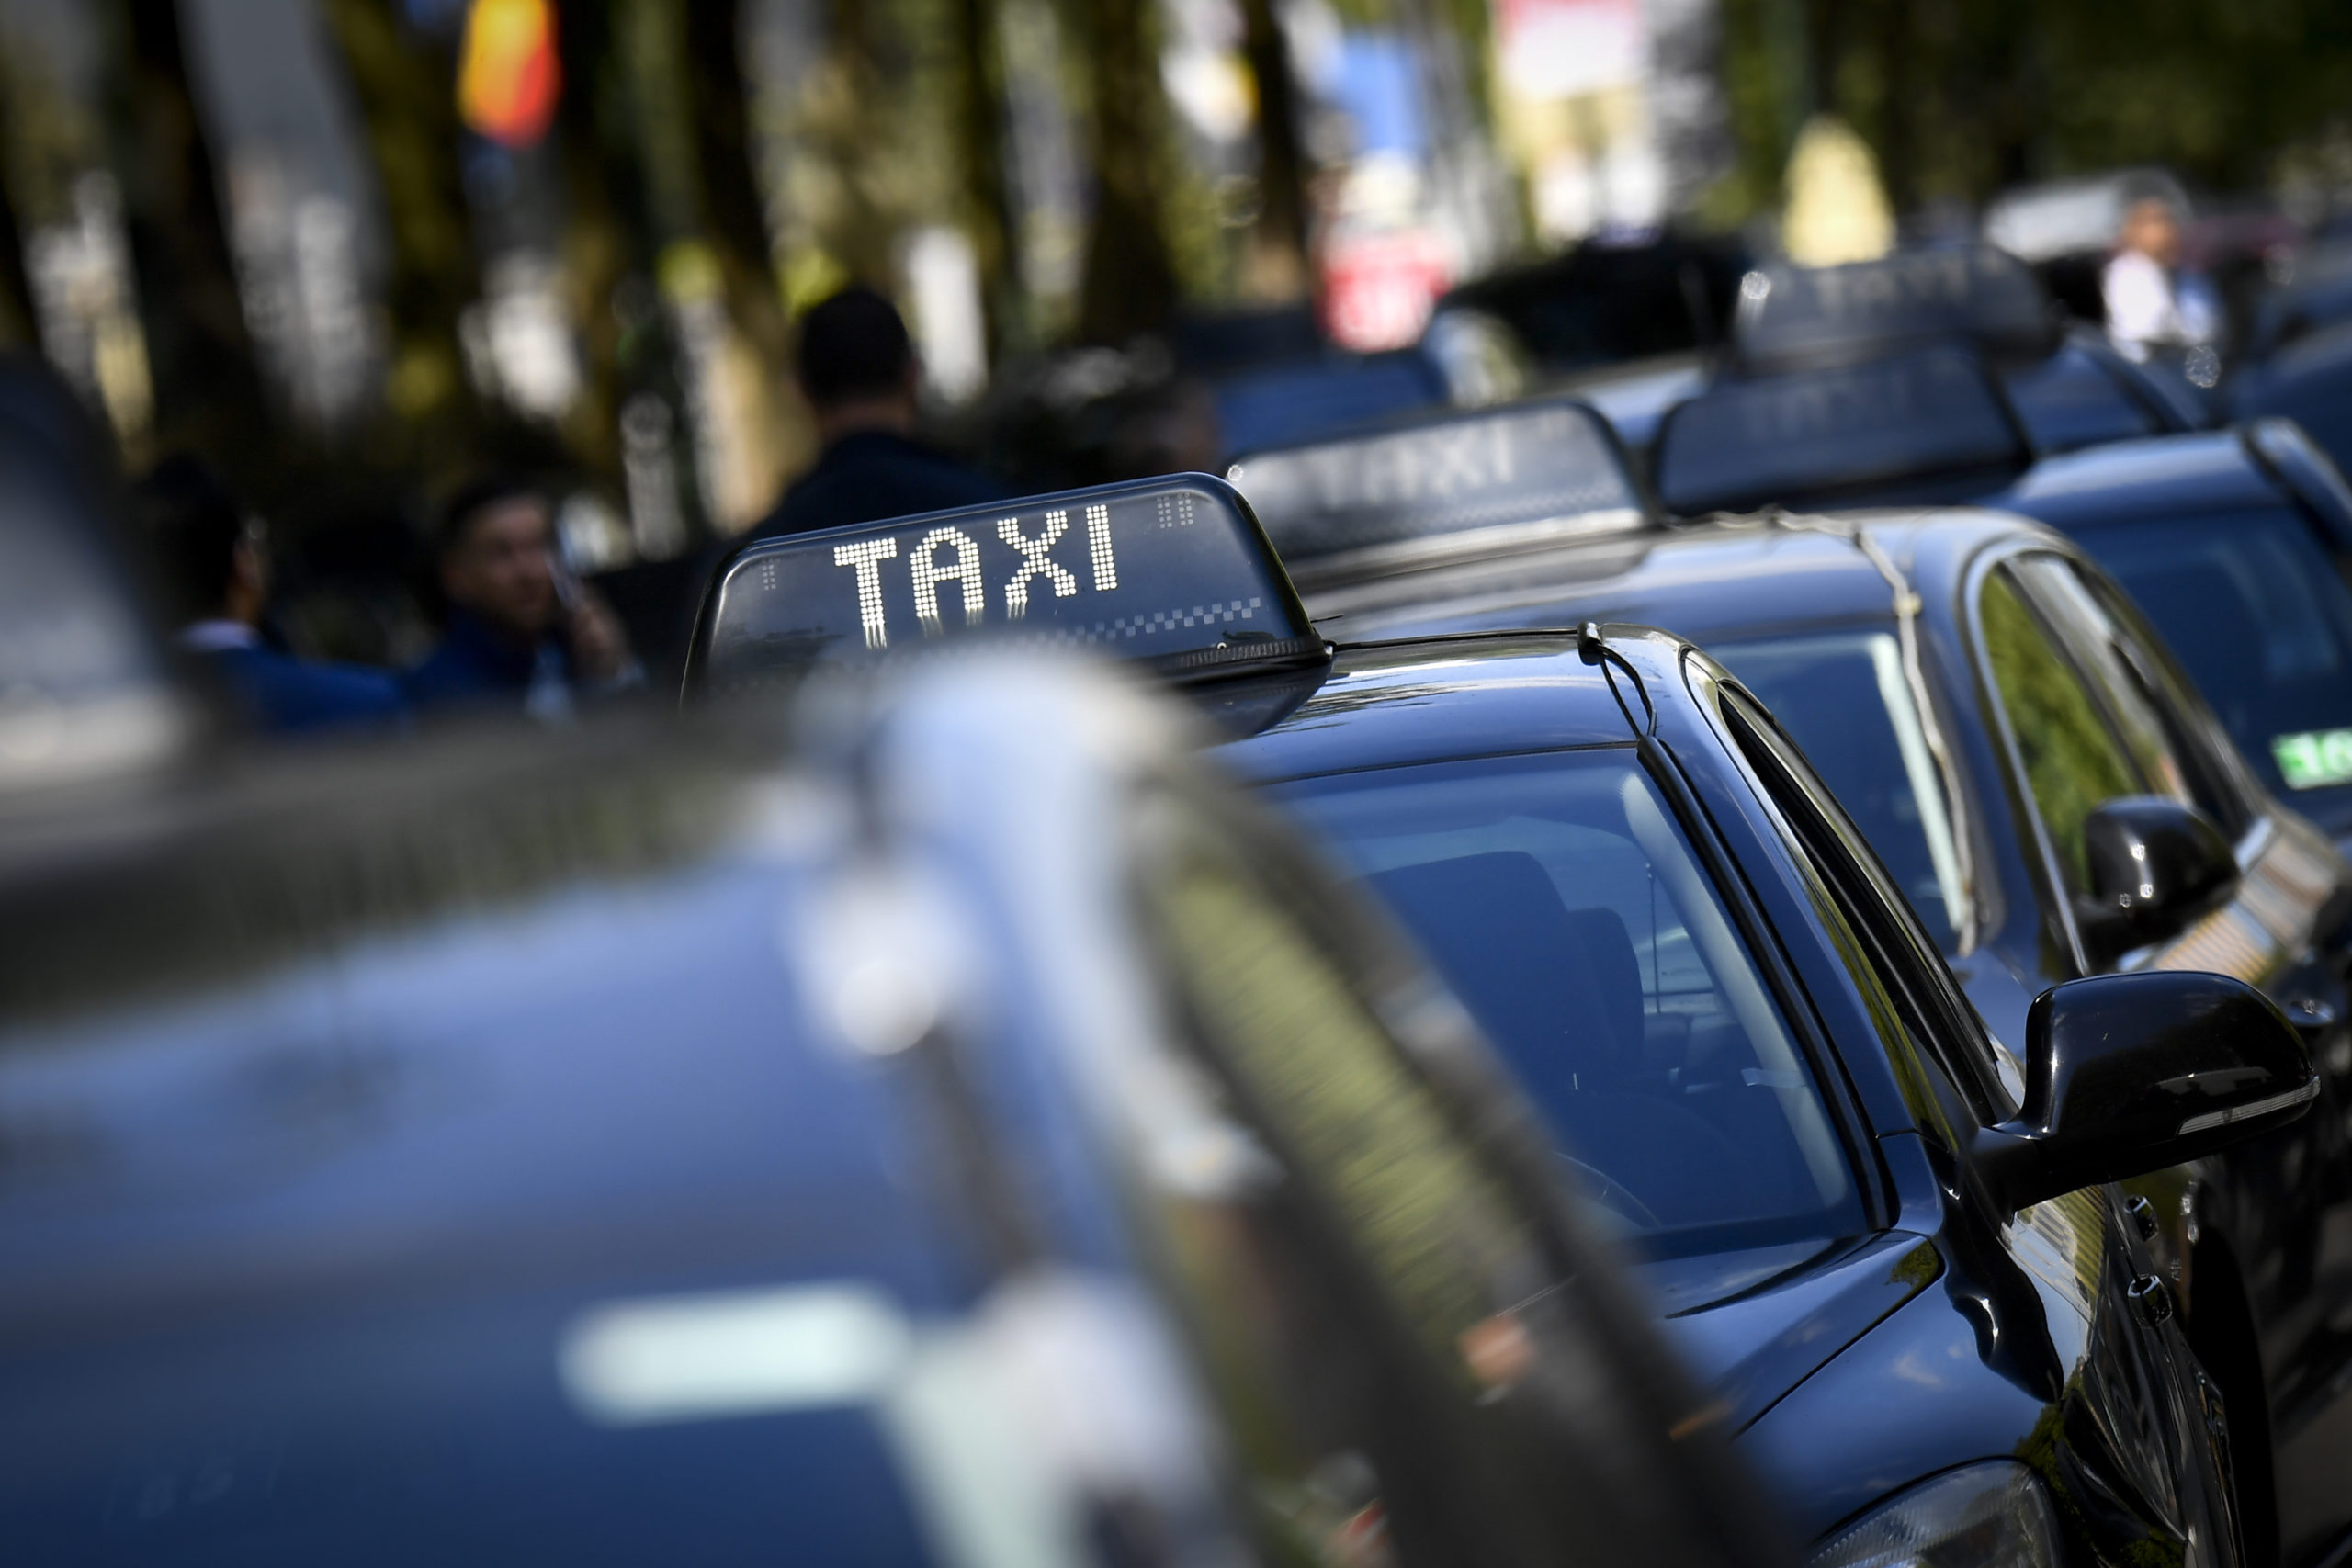 Taxi drivers call for close-down, federation asks government support